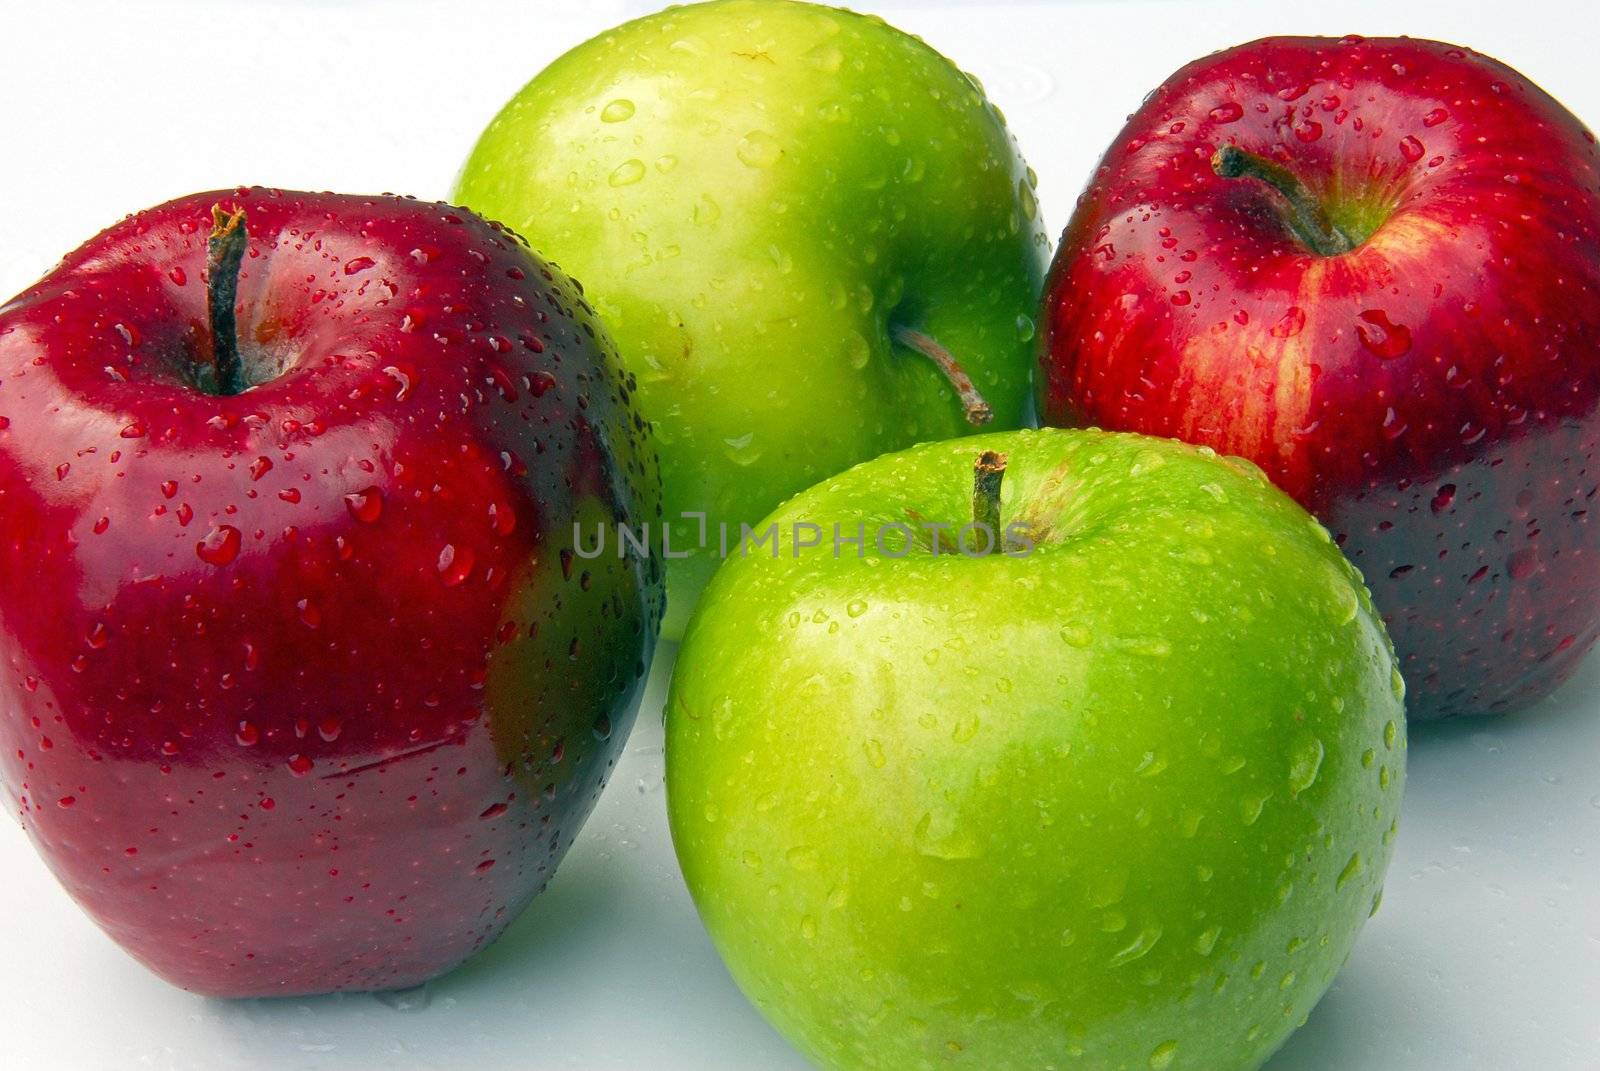 An isolated shot of red and green apples